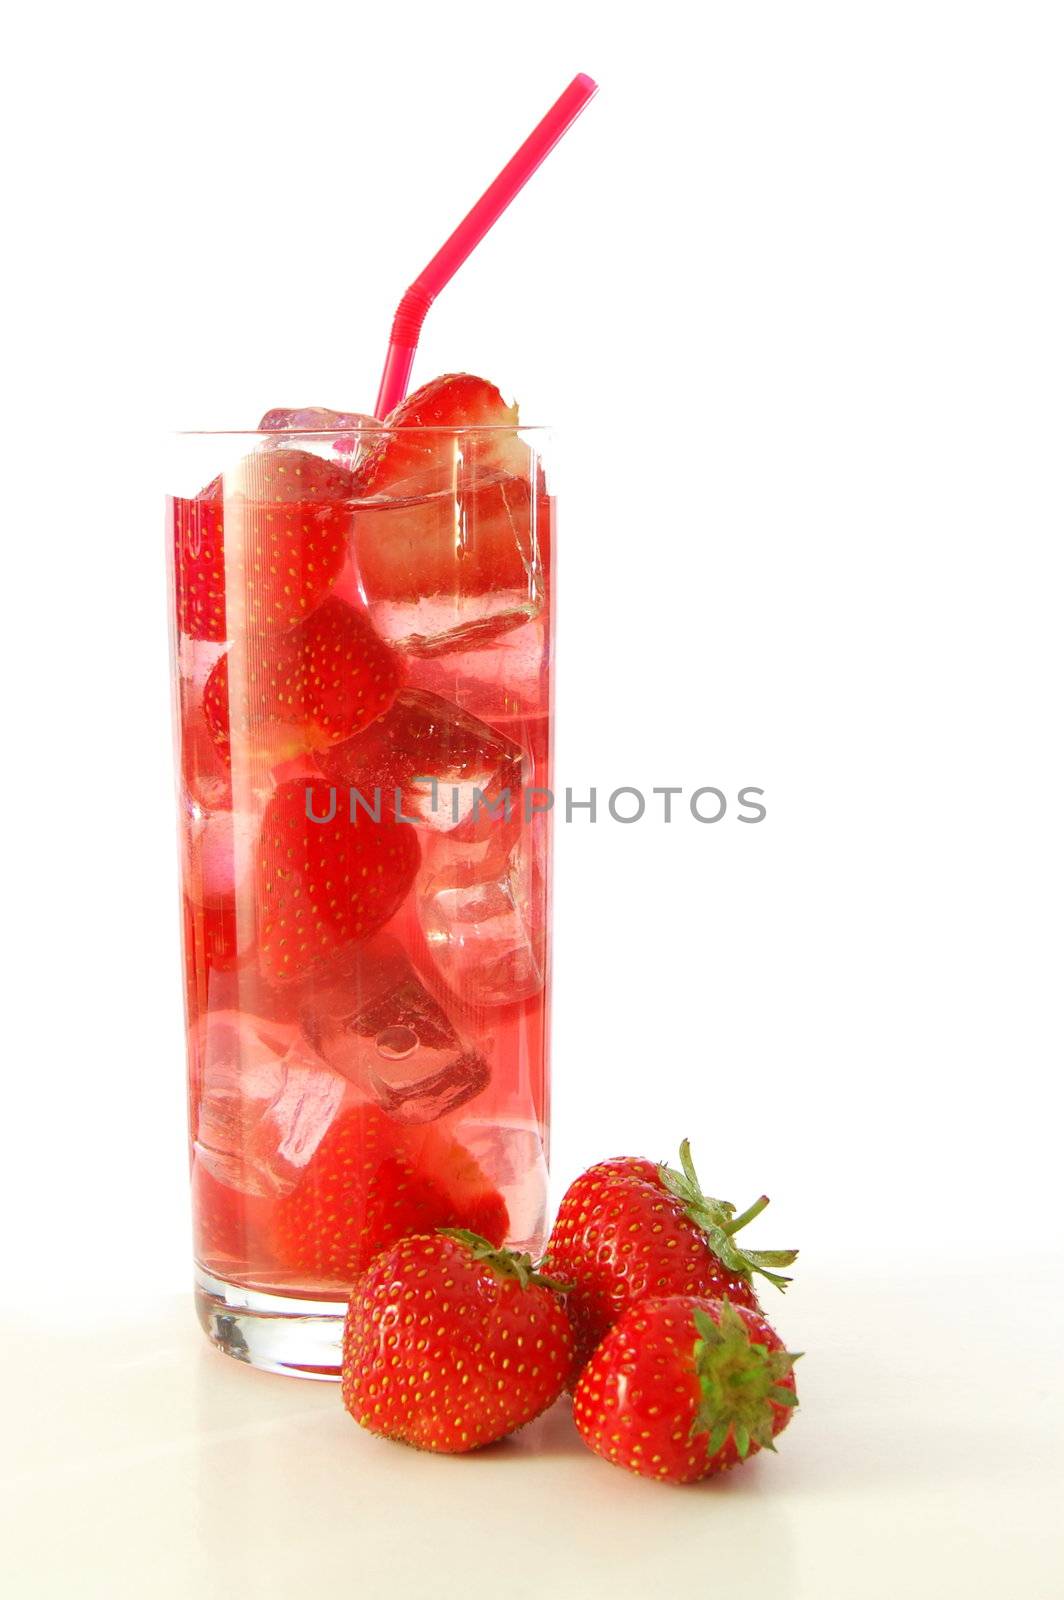 red strawberry cocktail drink in long glass